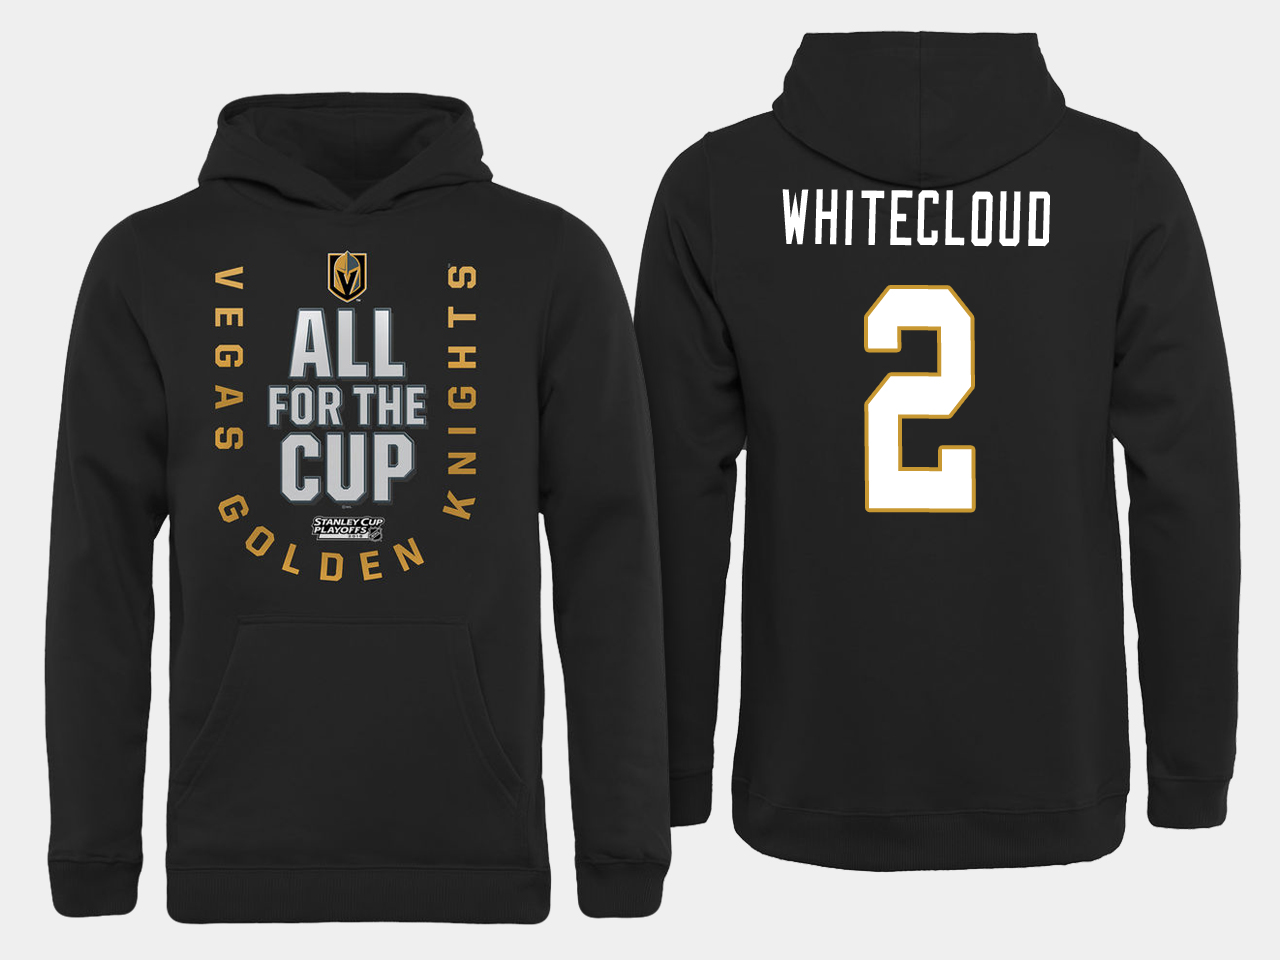 Men NHL Vegas Golden Knights #2 Whitecloud All for the Cup hoodie